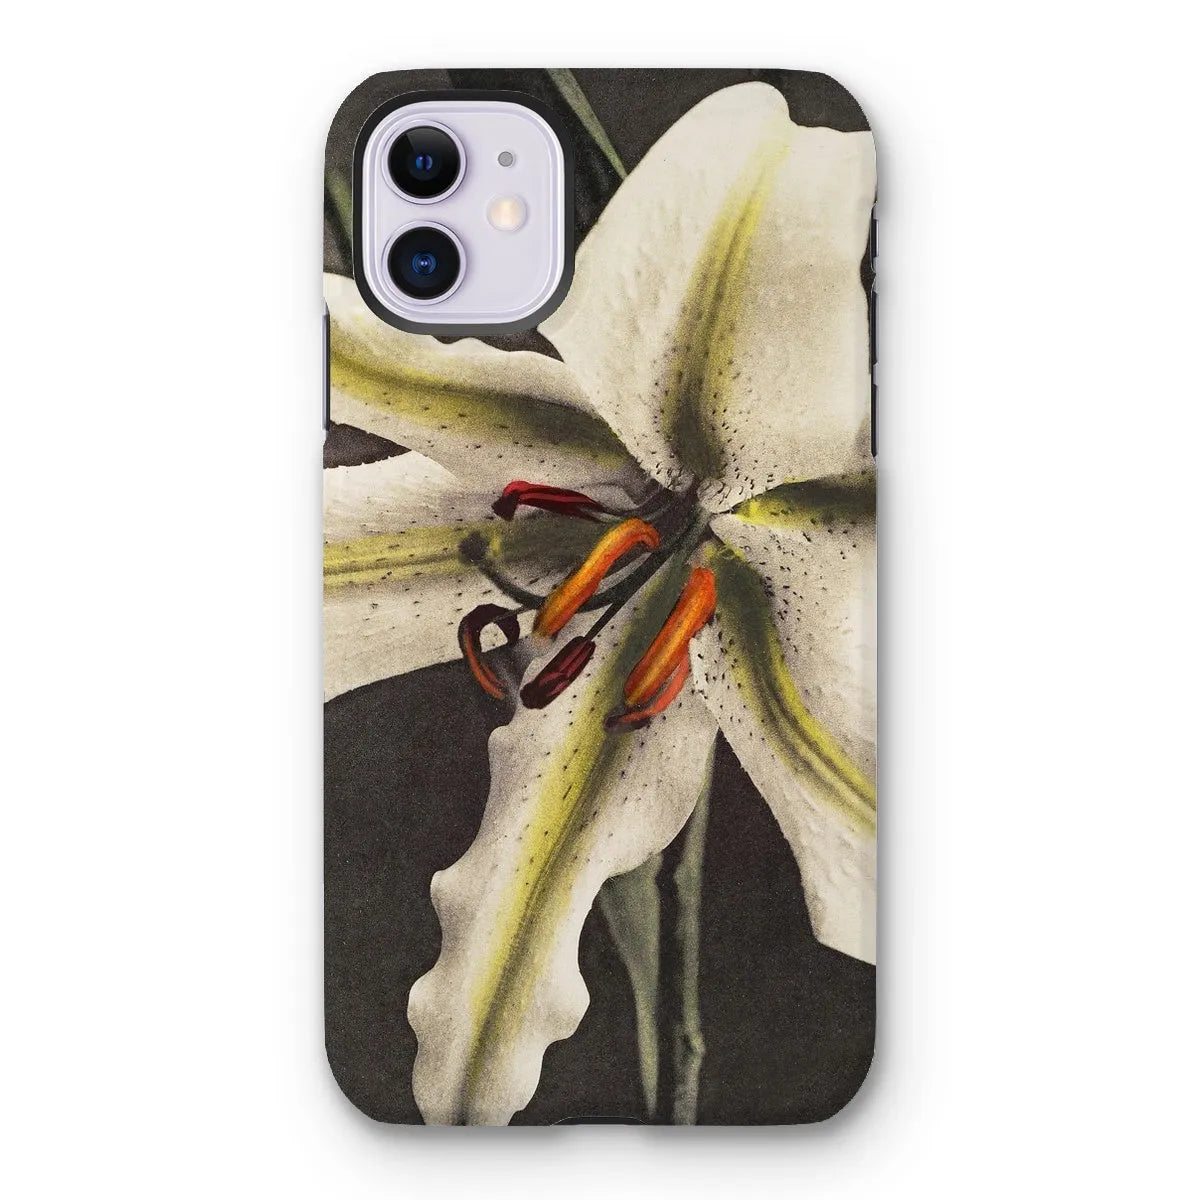 Lily By Kazumasa Ogawa Art Phone Case - Iphone 11 / Matte - Mobile Phone Cases - Aesthetic Art